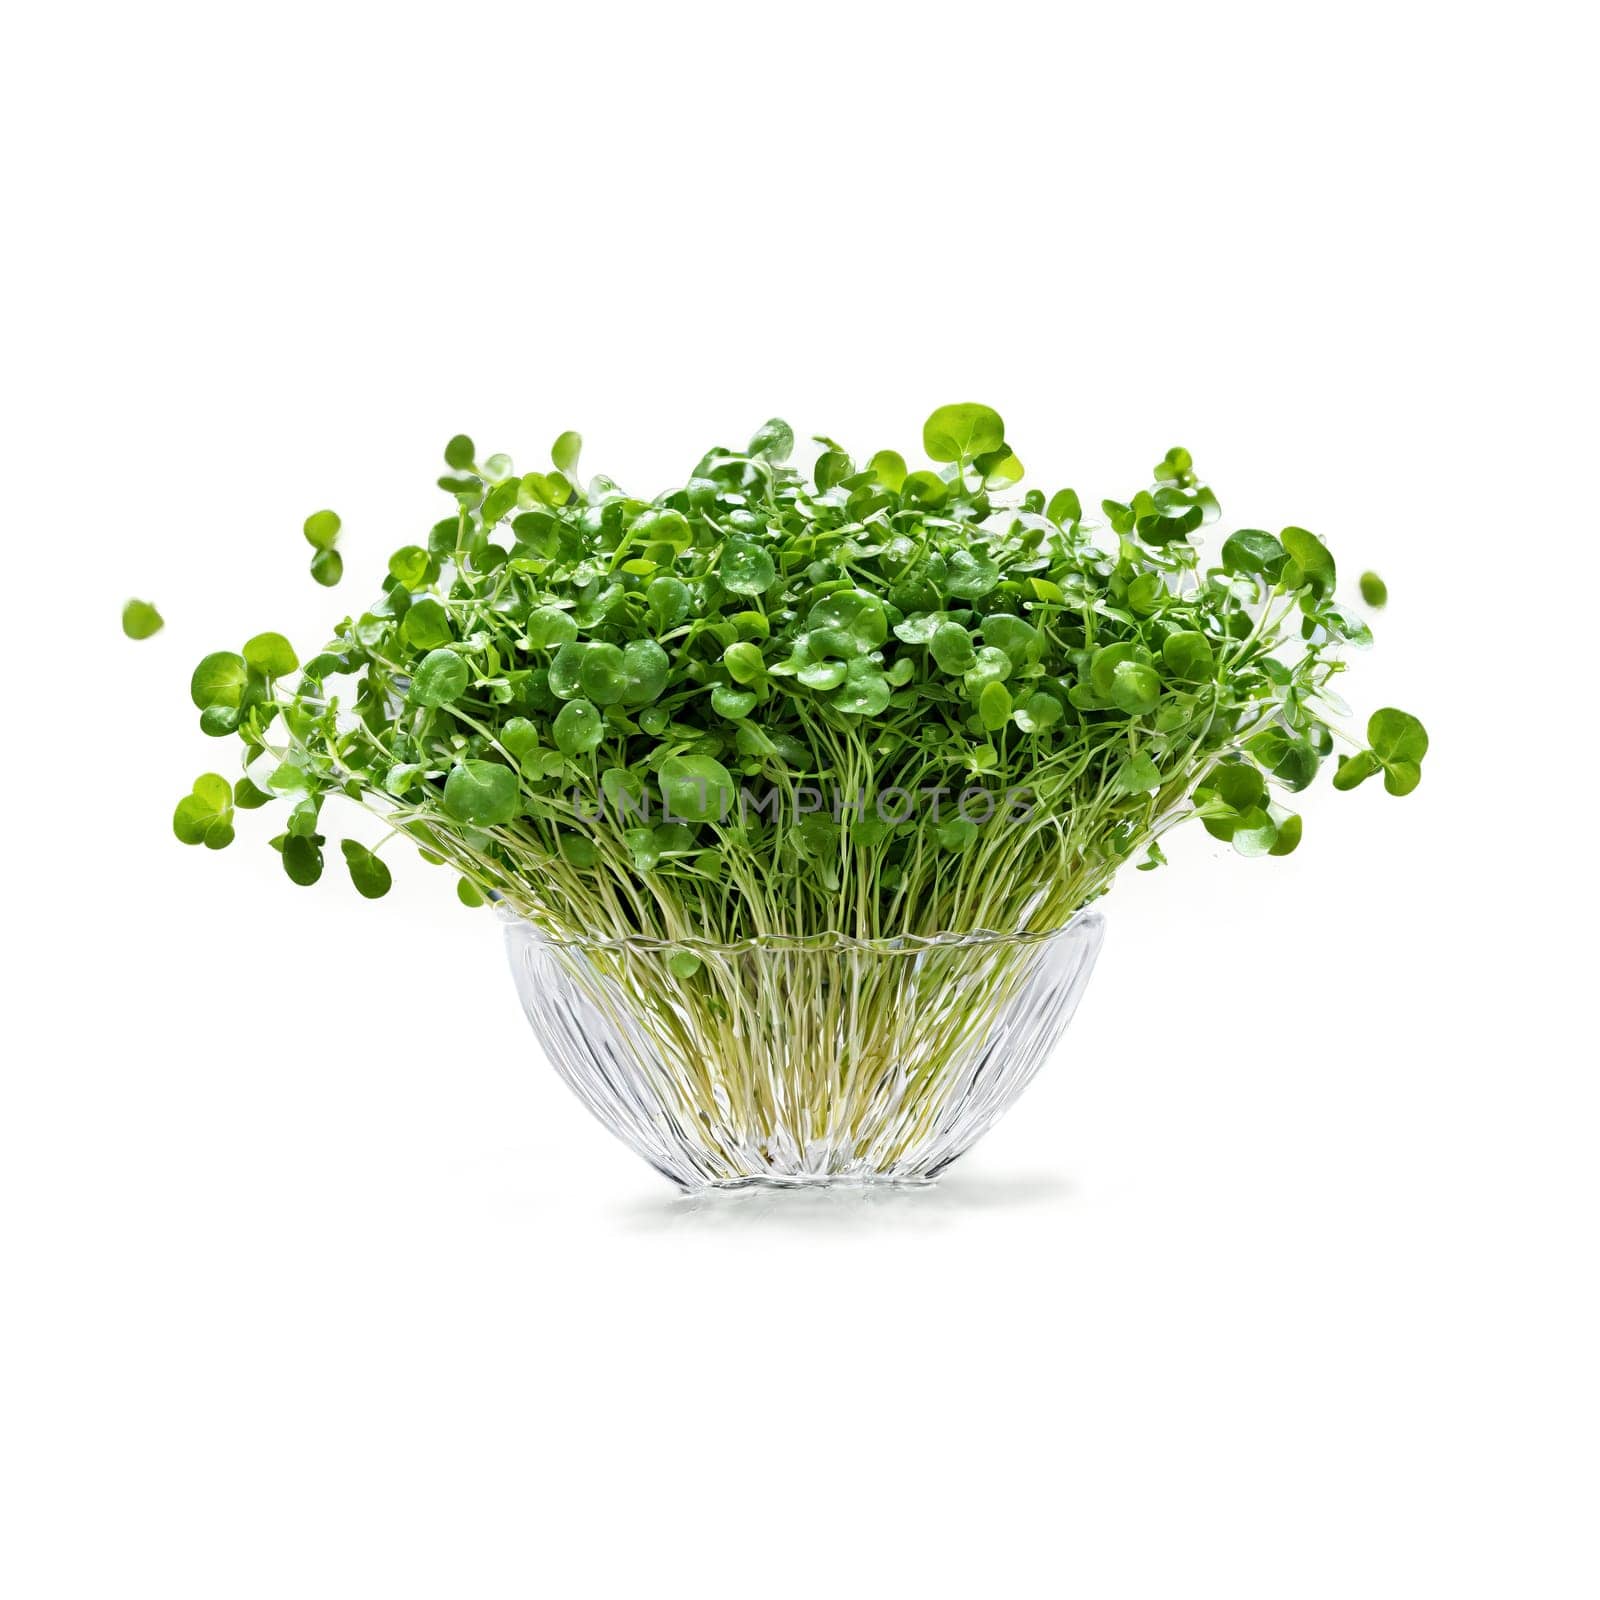 Watercress with small leaves and stems in dynamic splash of water Food and culinary concept by panophotograph